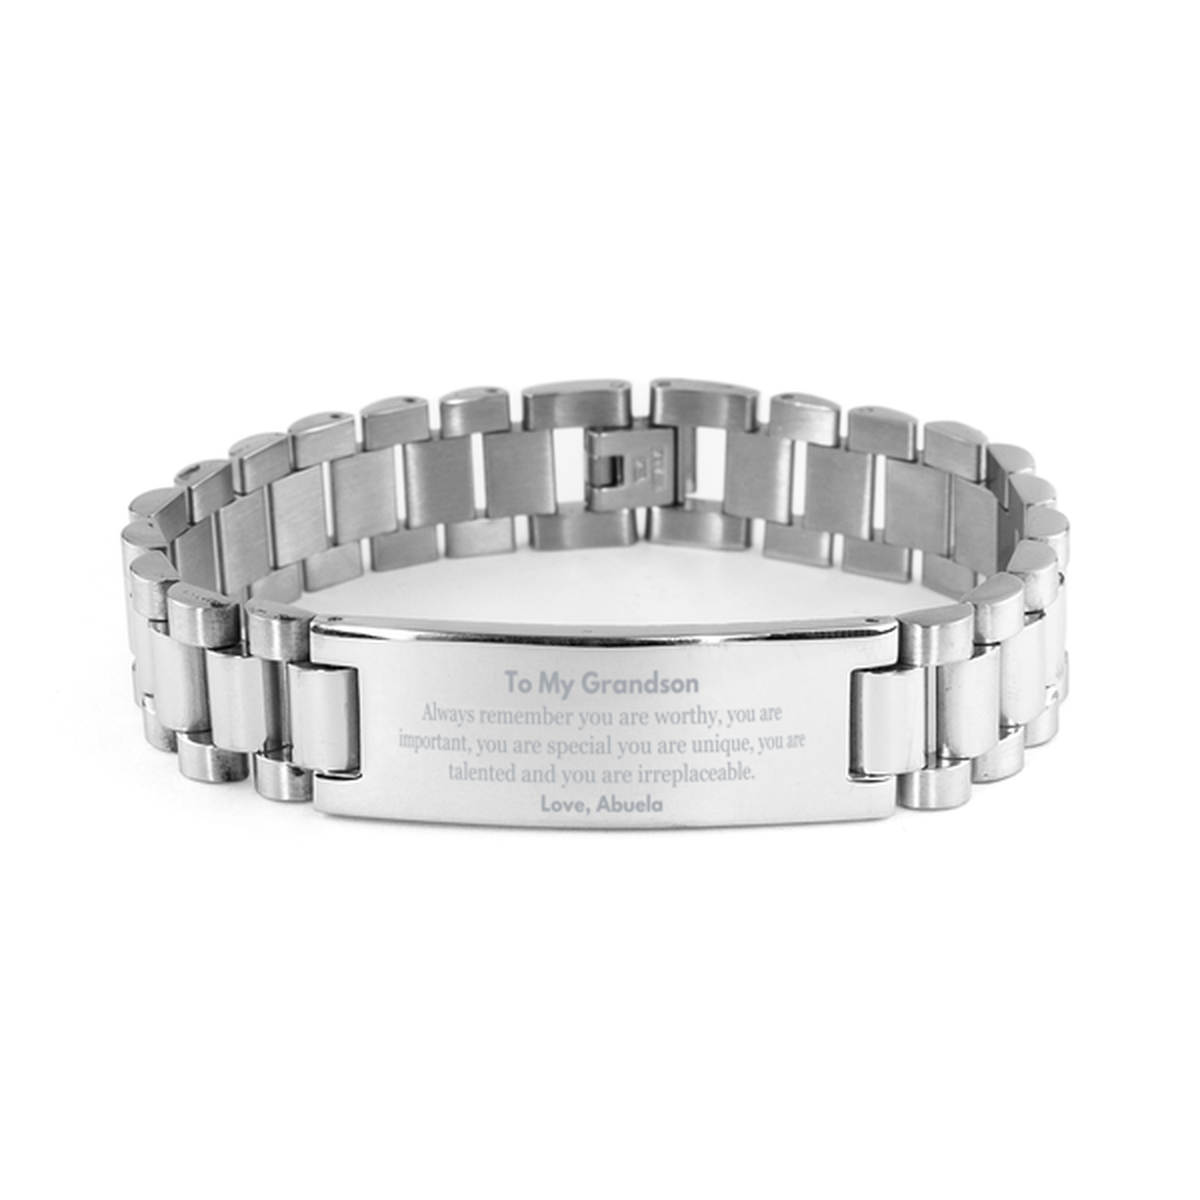 Grandson Birthday Gifts from Abuela, Inspirational Ladder Stainless Steel Bracelet for Grandson Christmas Graduation Gifts for Grandson Always remember you are worthy, you are important. Love, Abuela